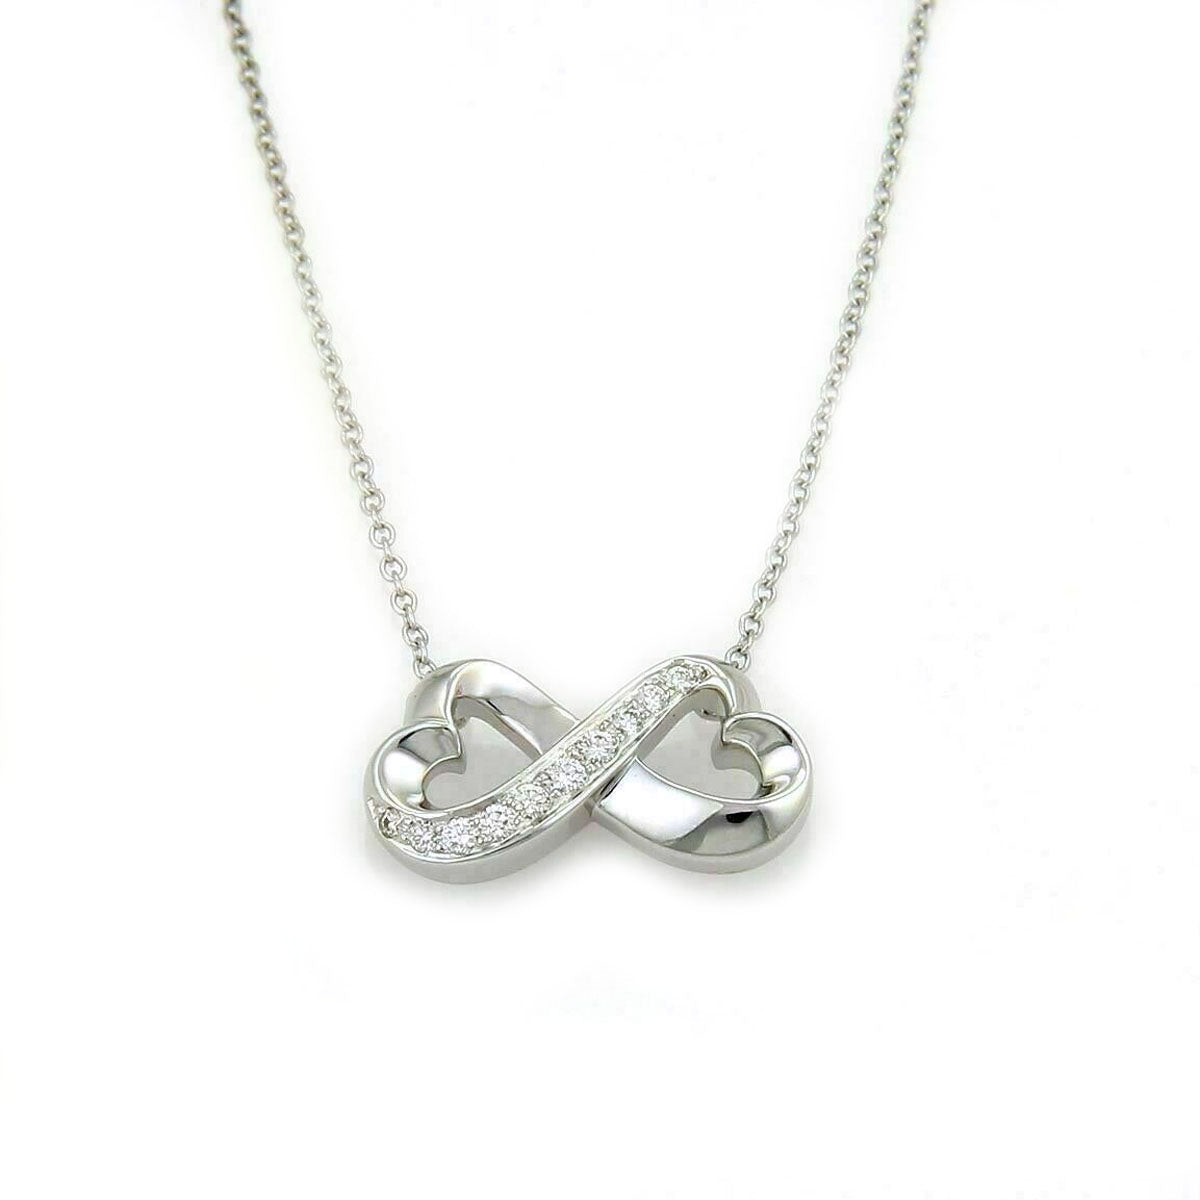 Tiffany & Co. Picasso Diamond Double Loving Heart 18k White Gold Pendant Necklace | Necklaces | catalog, Designer Jewelry, Necklaces, Paloma Picasso, Pendants, Tiffany & Co. | Tiffany & Co.